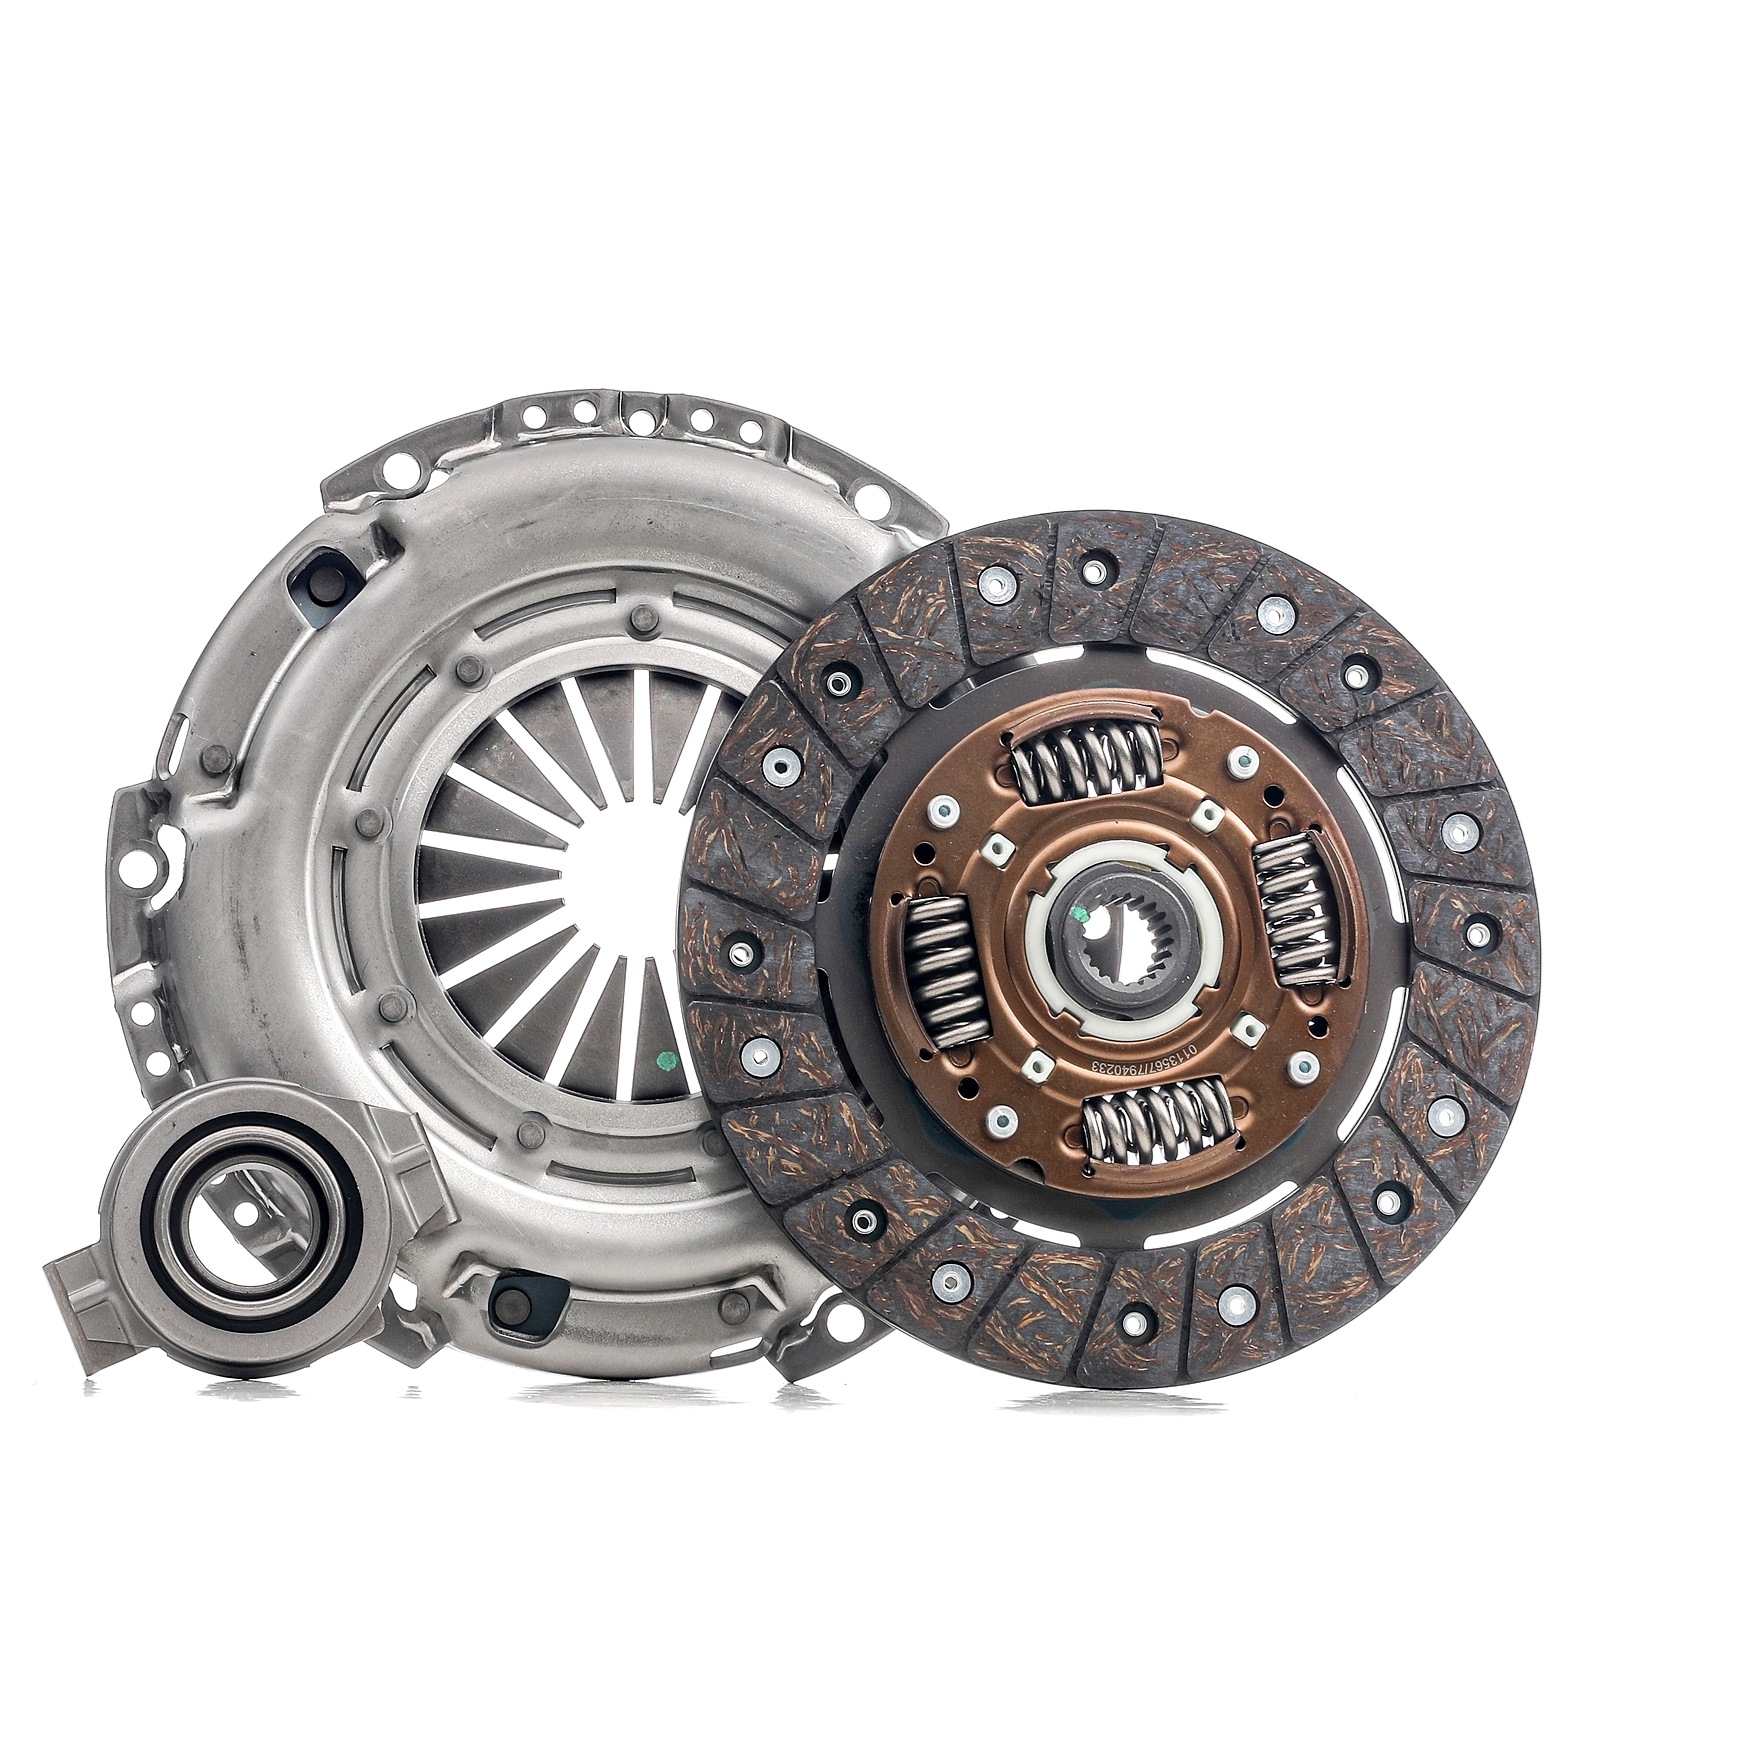 STARK SKCK-0100073 Clutch kit three-piece, with clutch release bearing, with clutch disc, 220mm